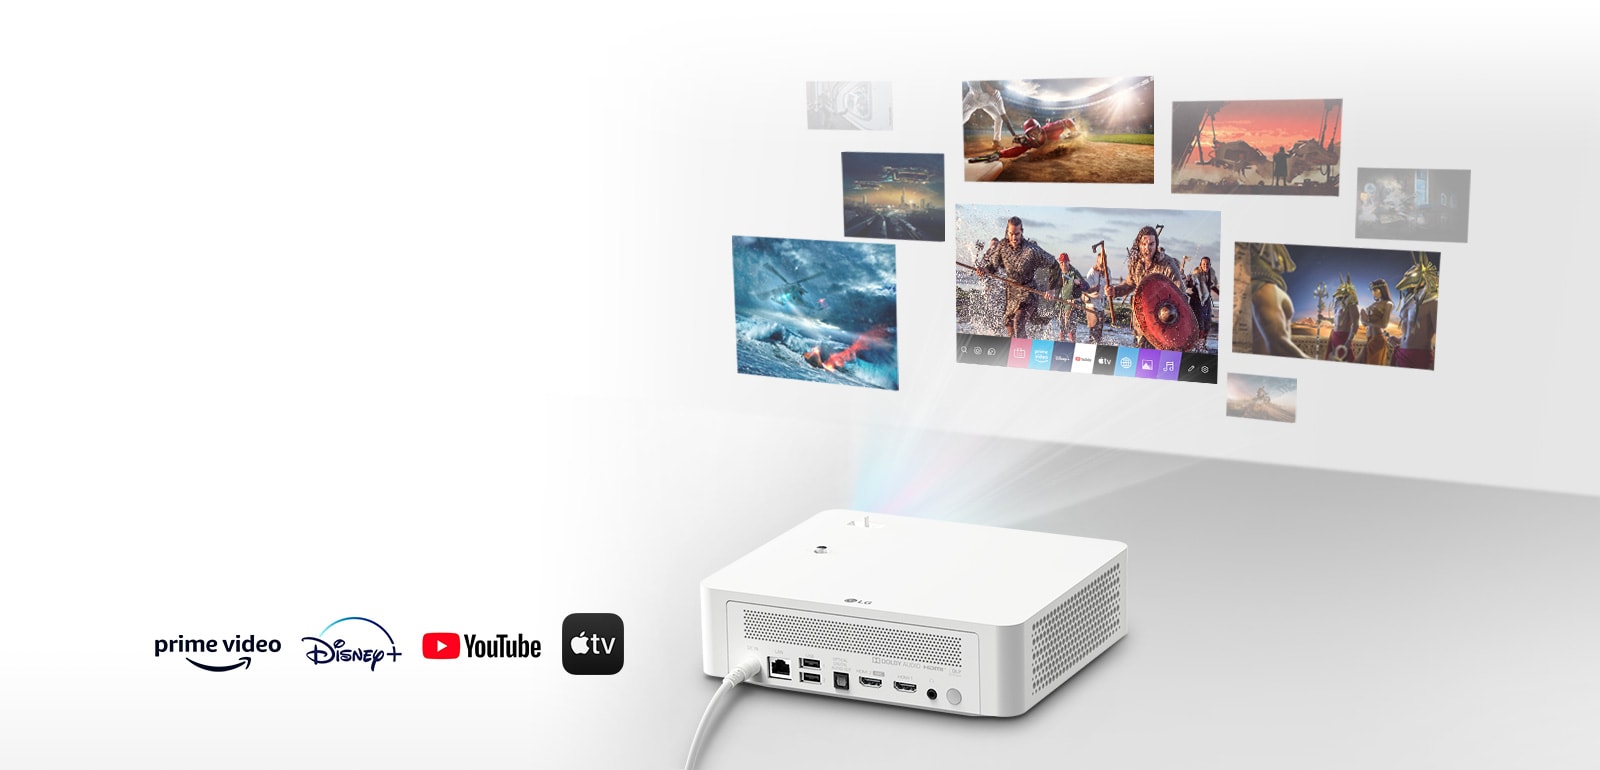 LG CineBeam projector to enjoy various contents